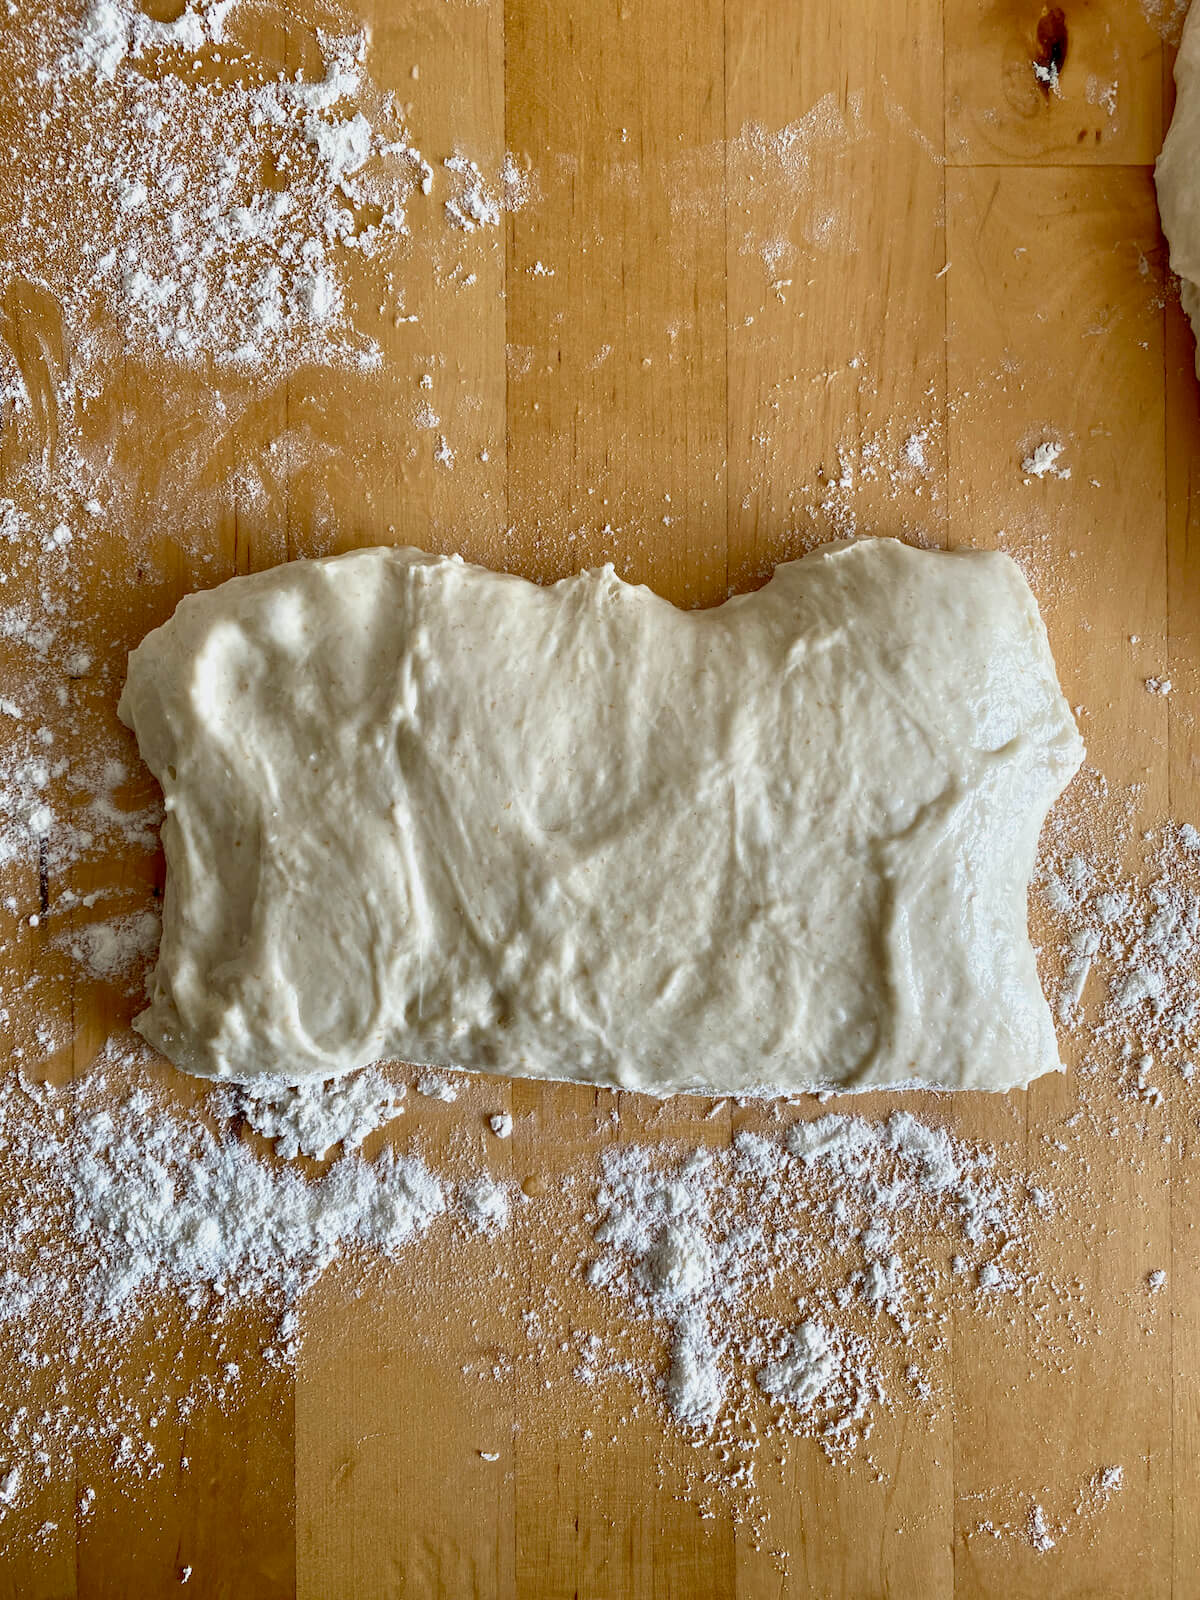 A piece of dough pulled into the shape of a rectangle on a floured work surface.